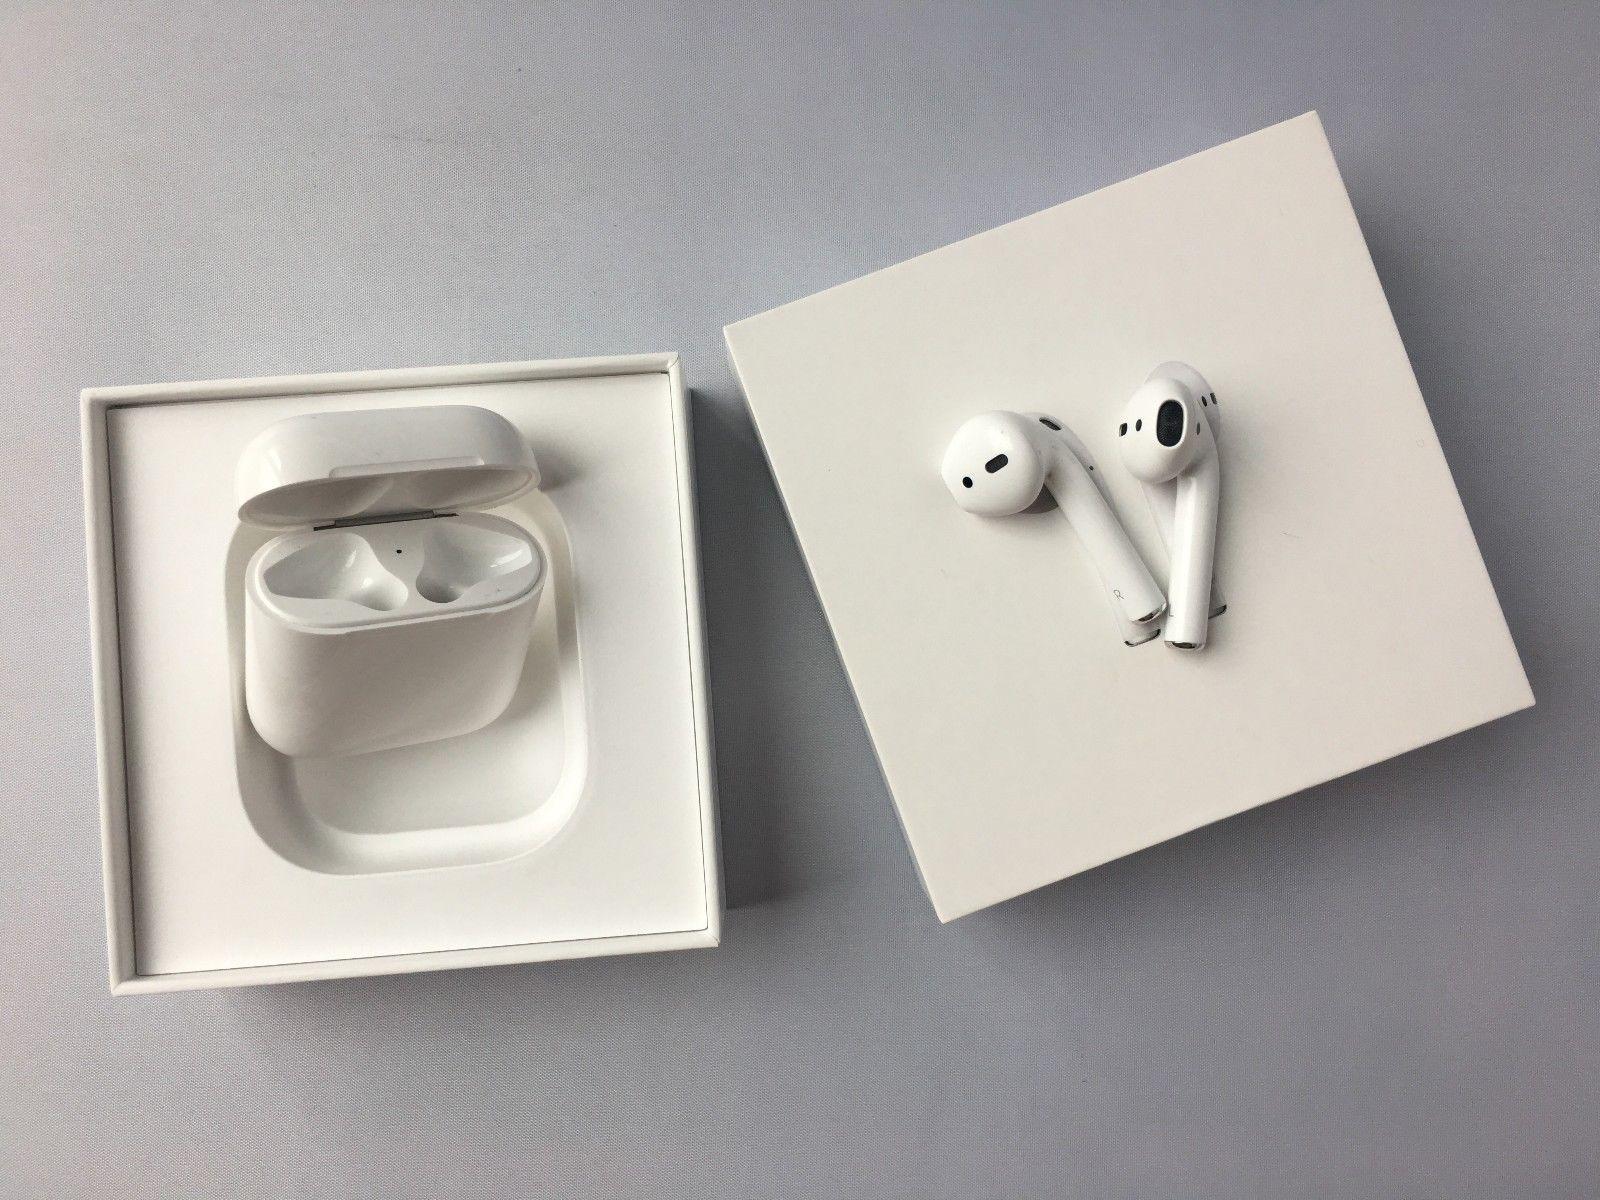 Airpods. Buy iphone